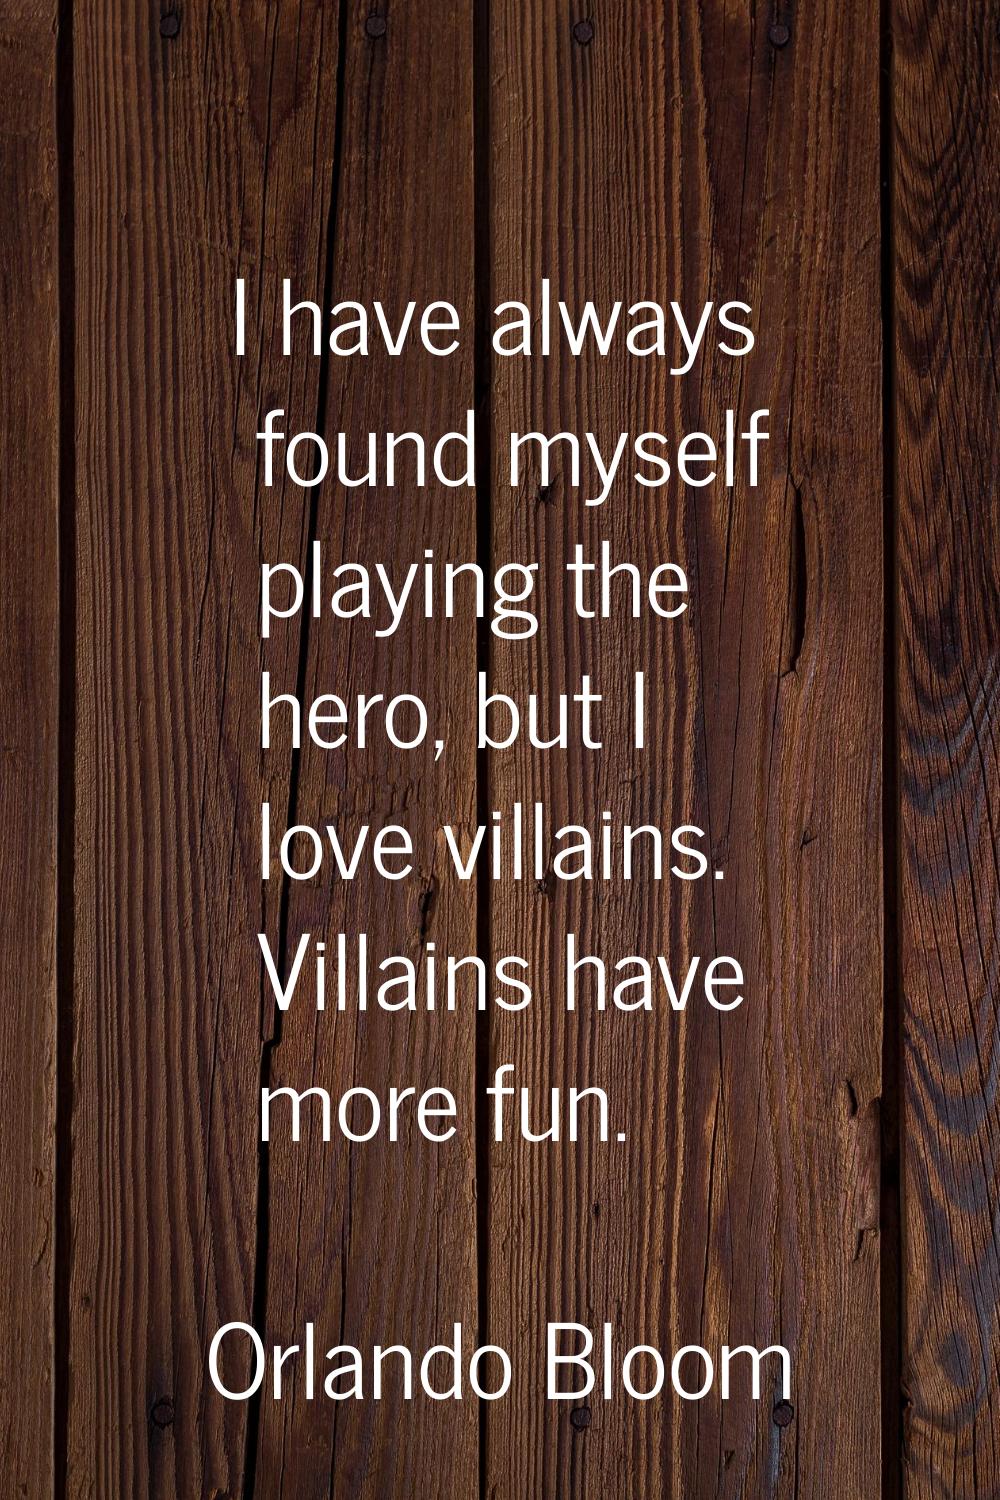 I have always found myself playing the hero, but I love villains. Villains have more fun.